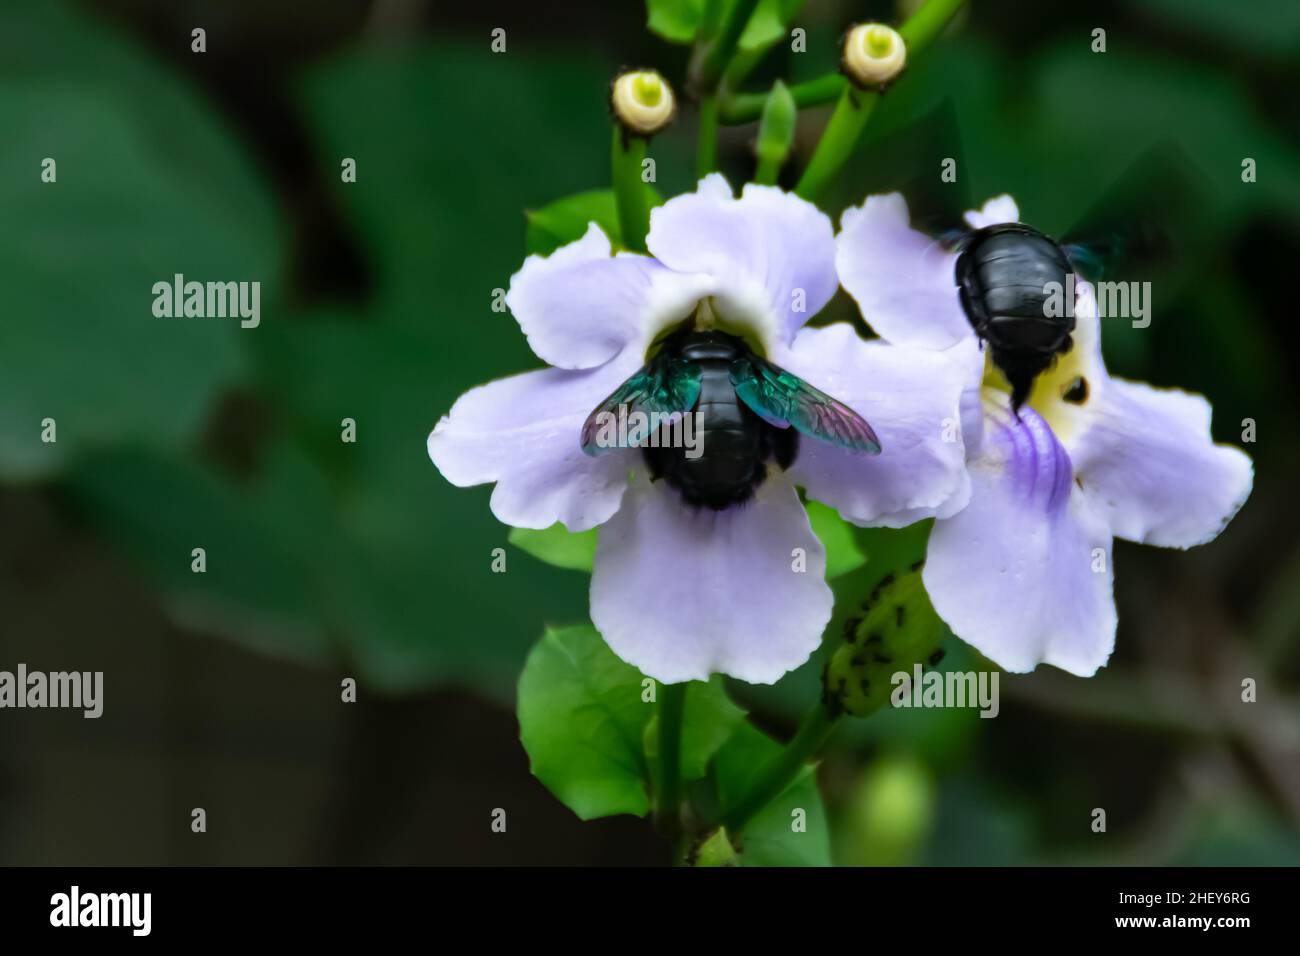 two of carpenter bees suck the honey from the nectar of blooming purple flower with blurry and soft focus nature background Stock Photo